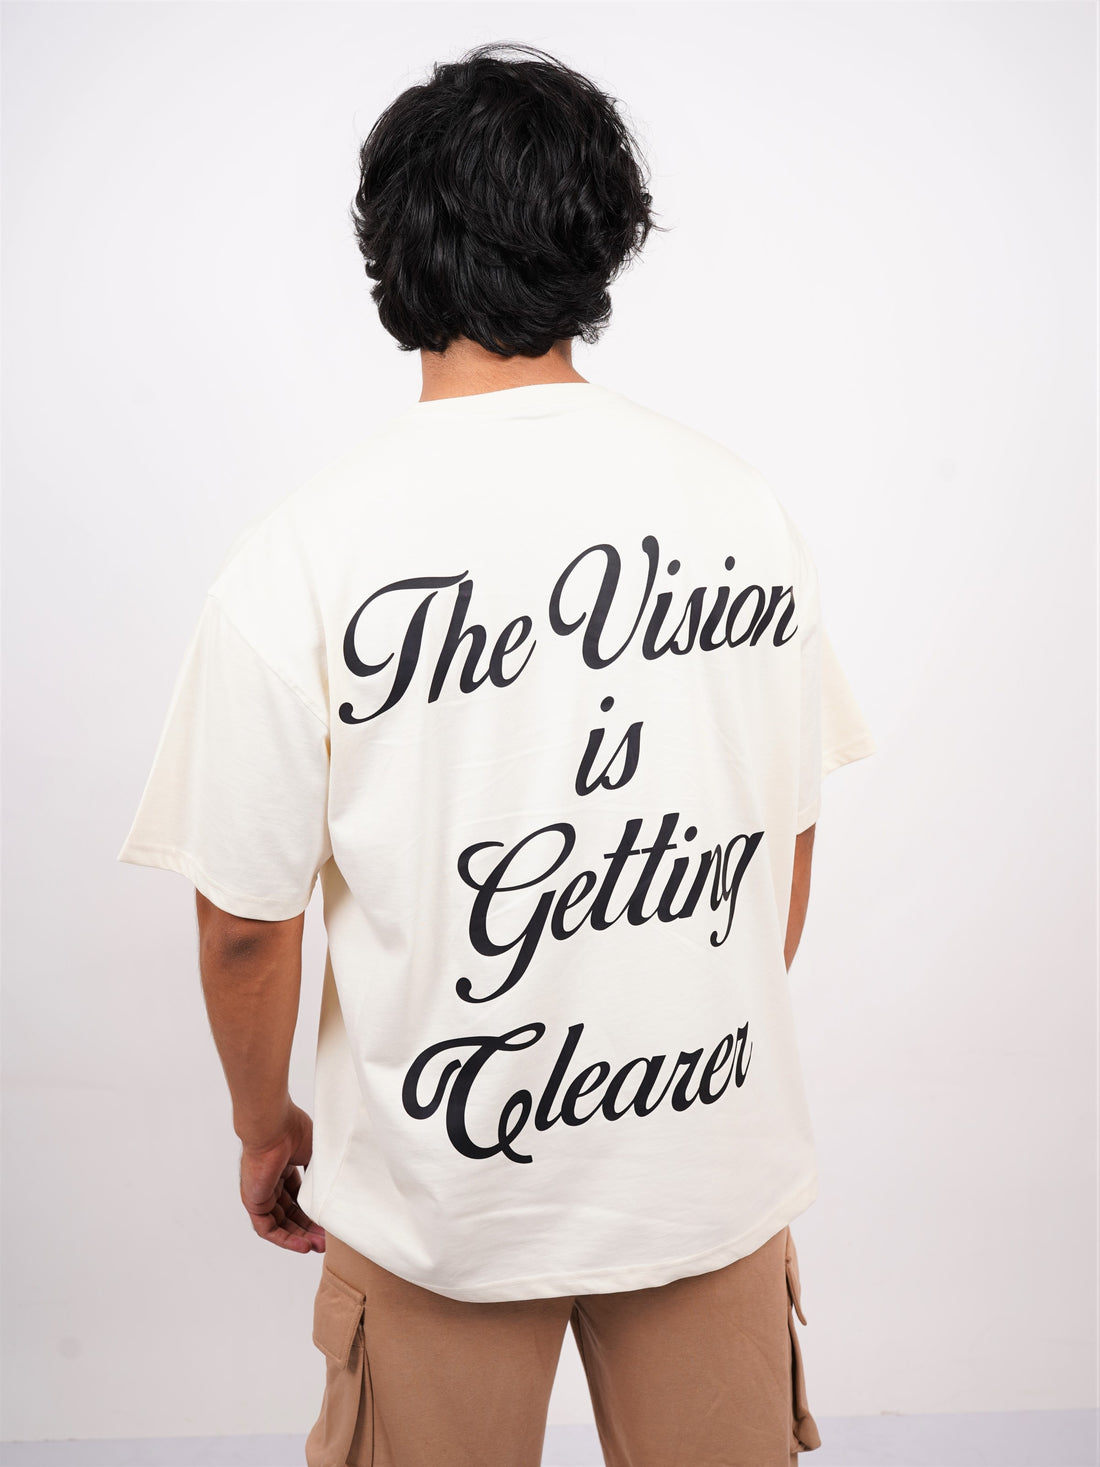 It’s getting clearer - Vision Drop Sleeved  tee   For Men and Women